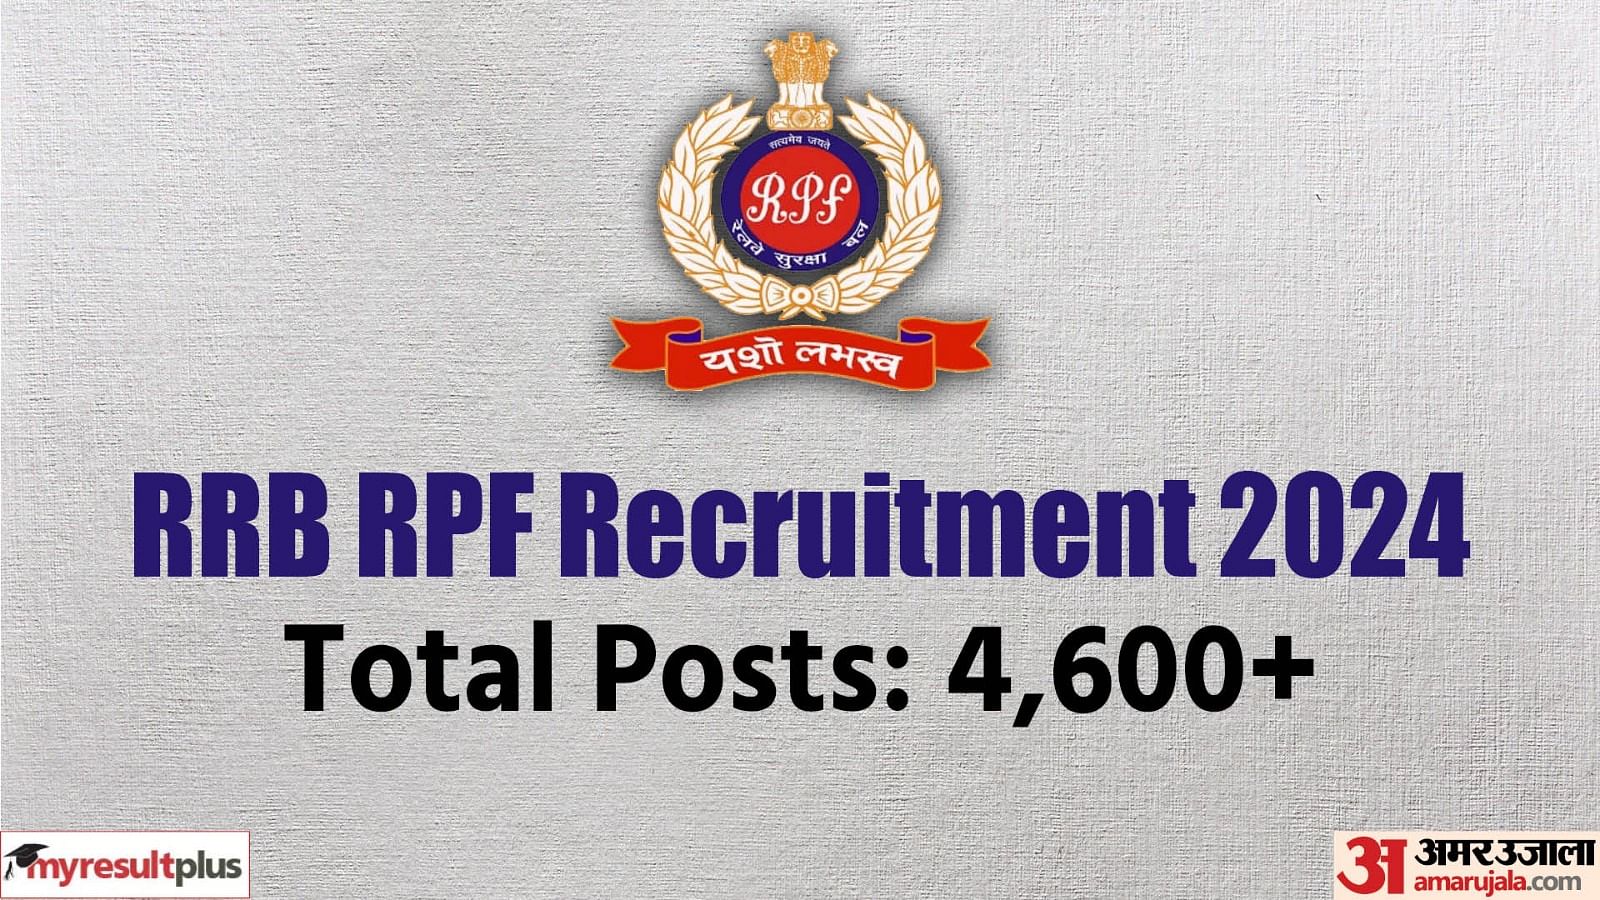 RRB RPF Recruitment 2024 Notification out at rpf.indianrailways.gov.in, Registration to start tomorrow